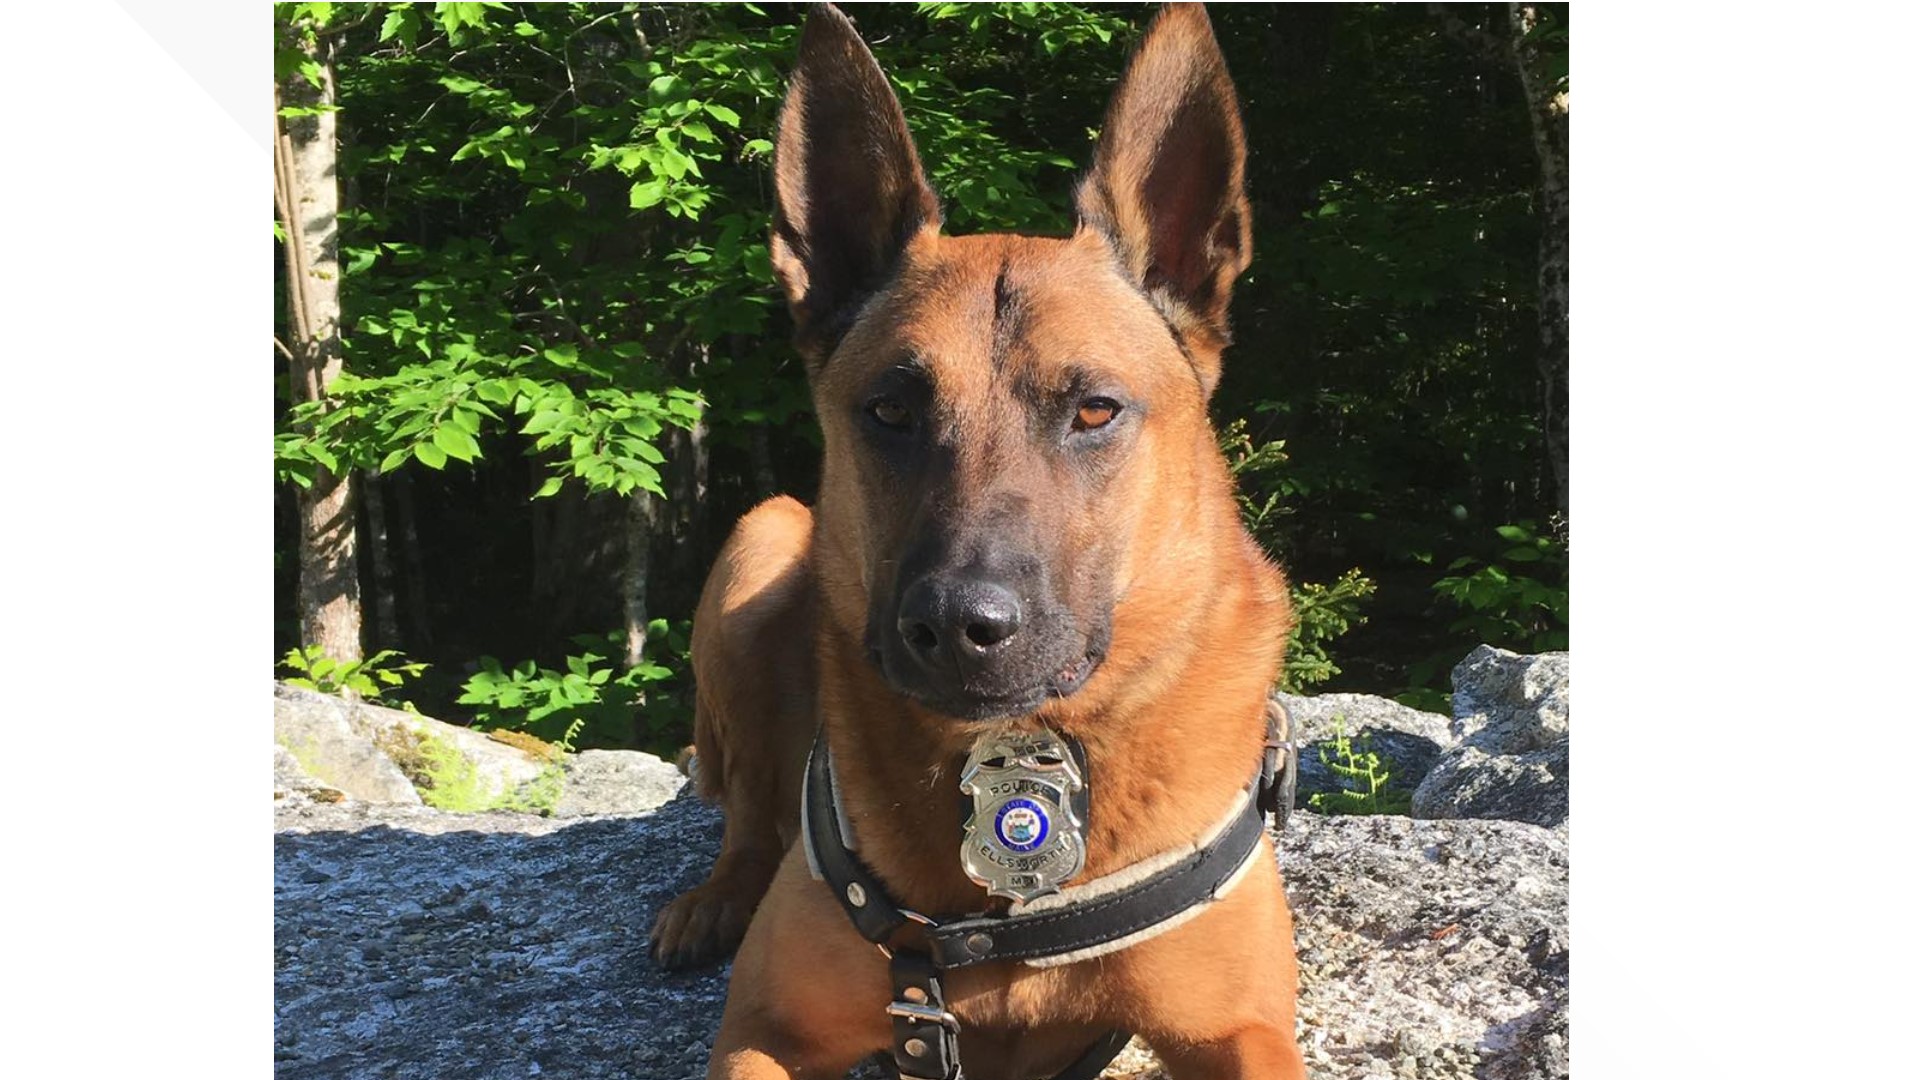 Police K9 Chase was with the department for 9 years. His retirement will include taking long walks, hanging out at camp, and eating plenty of dog treats.